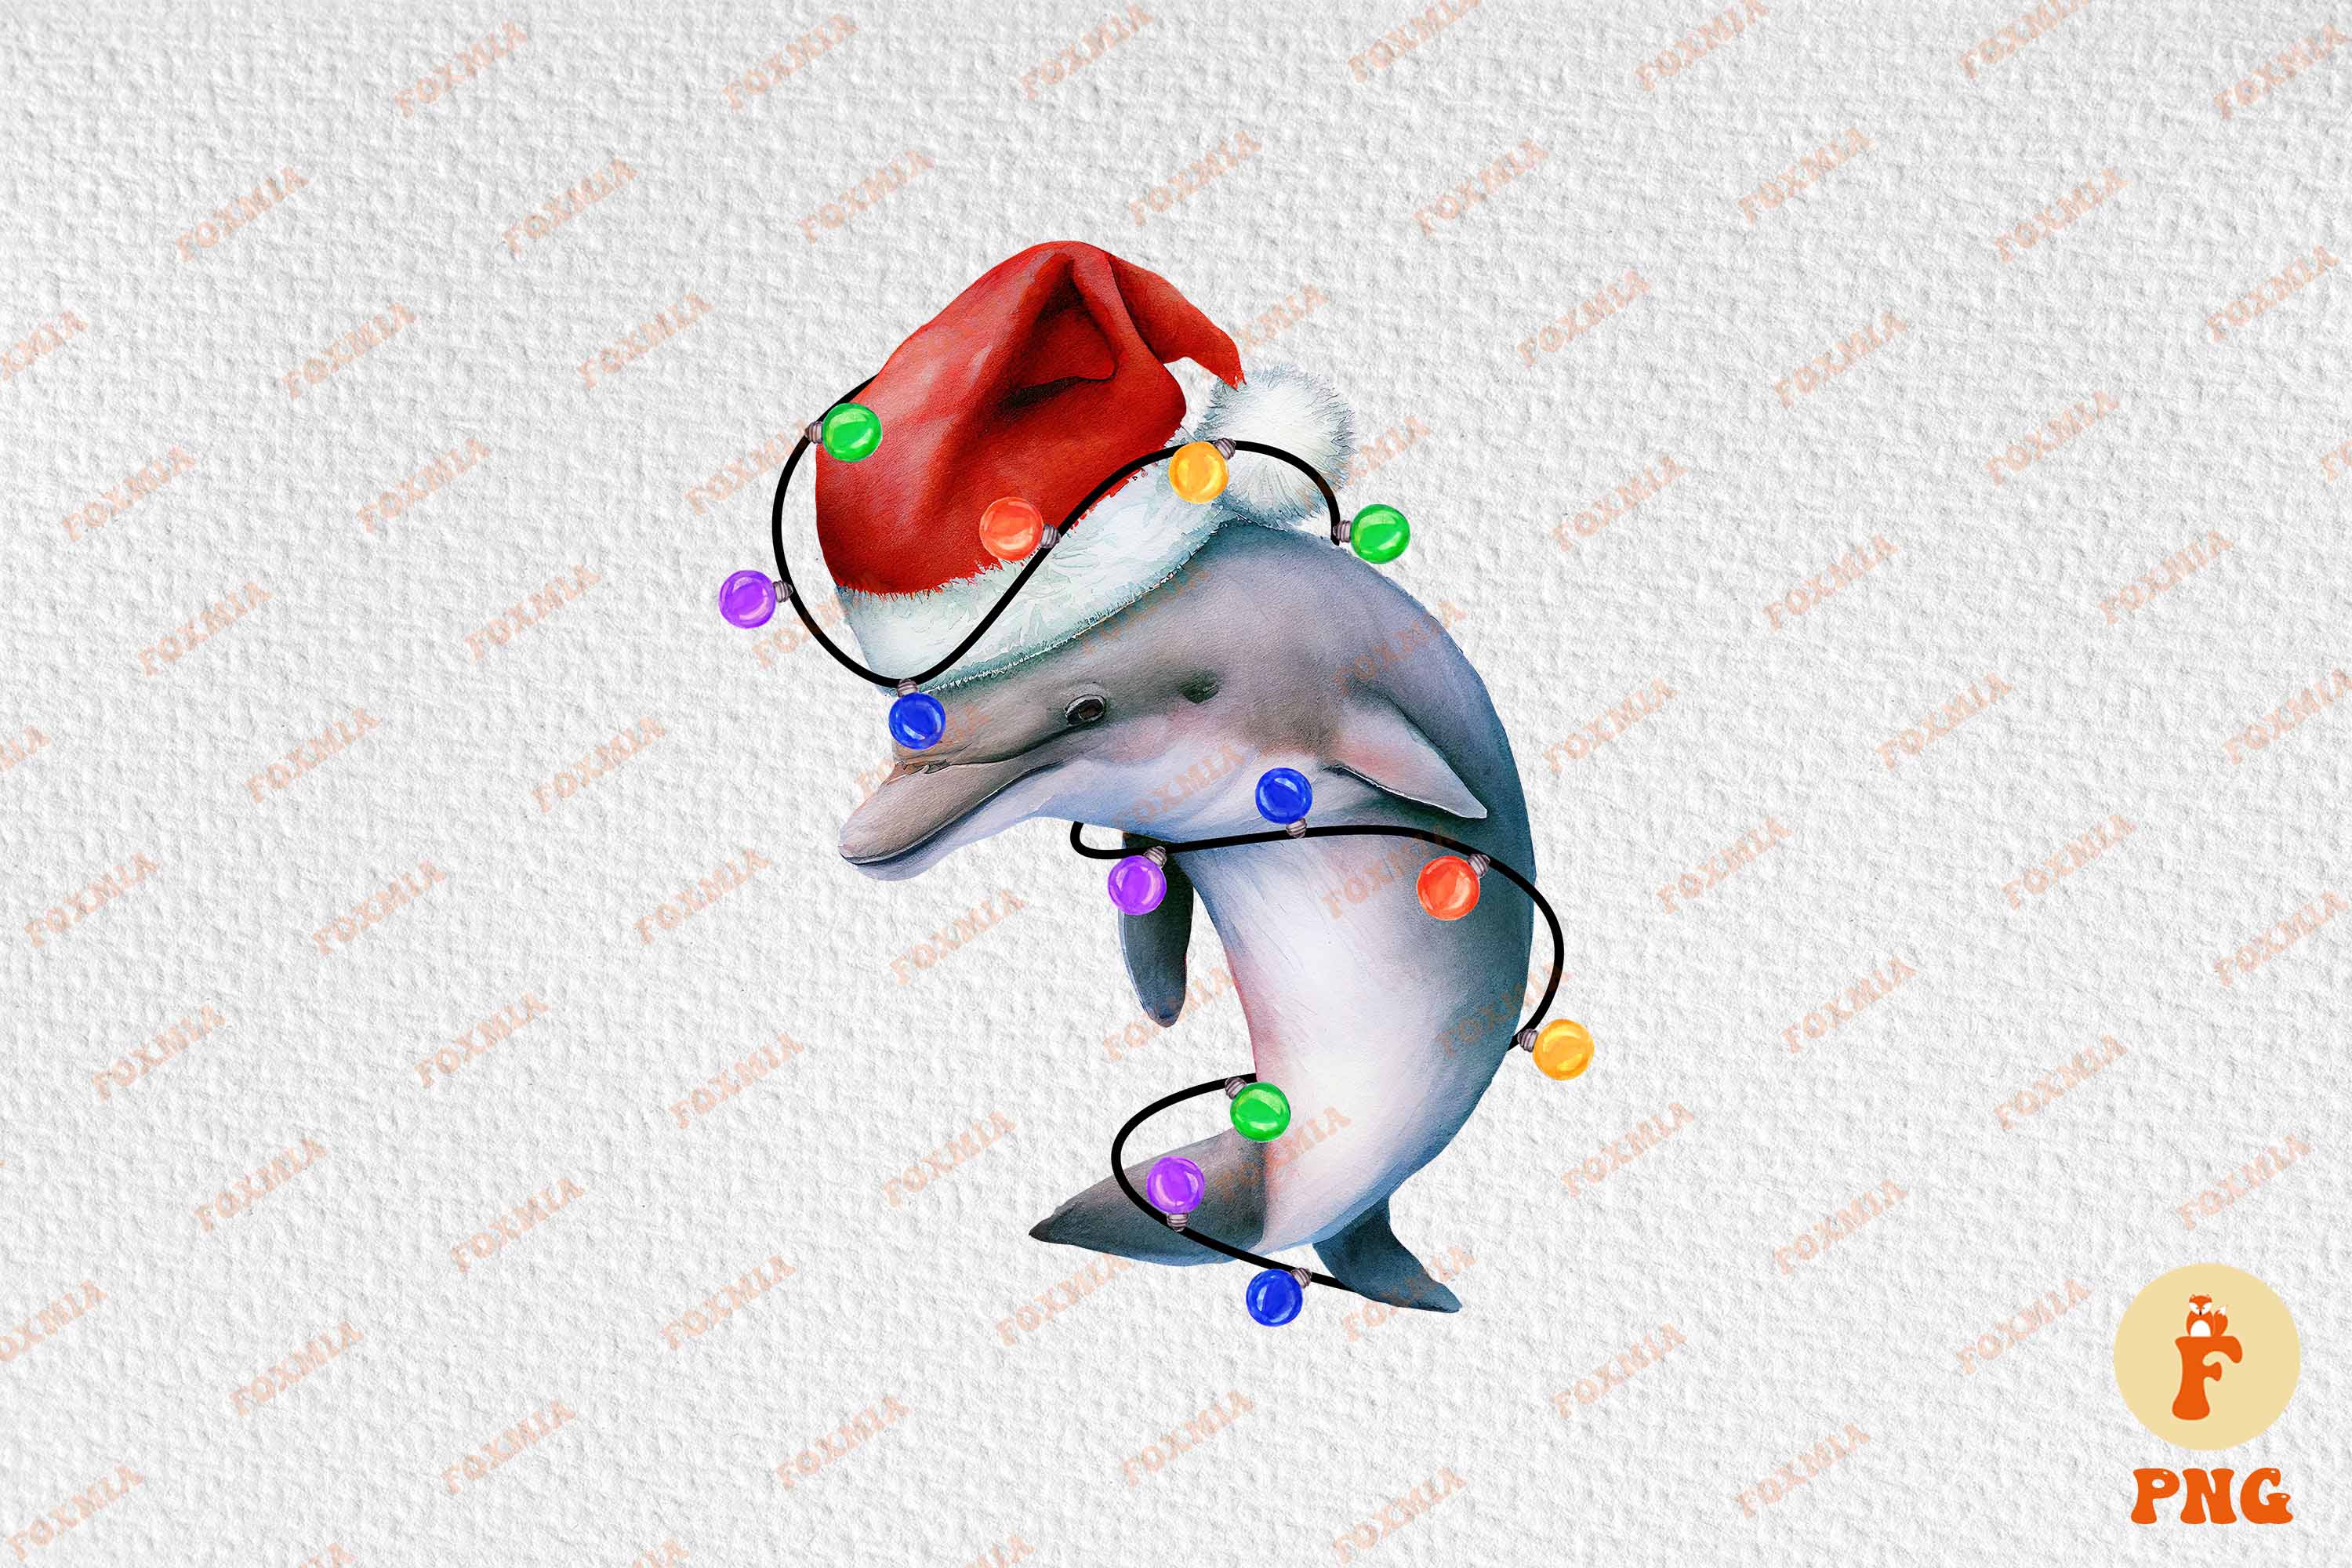 Enchanting image of a dolphin in a santa hat.